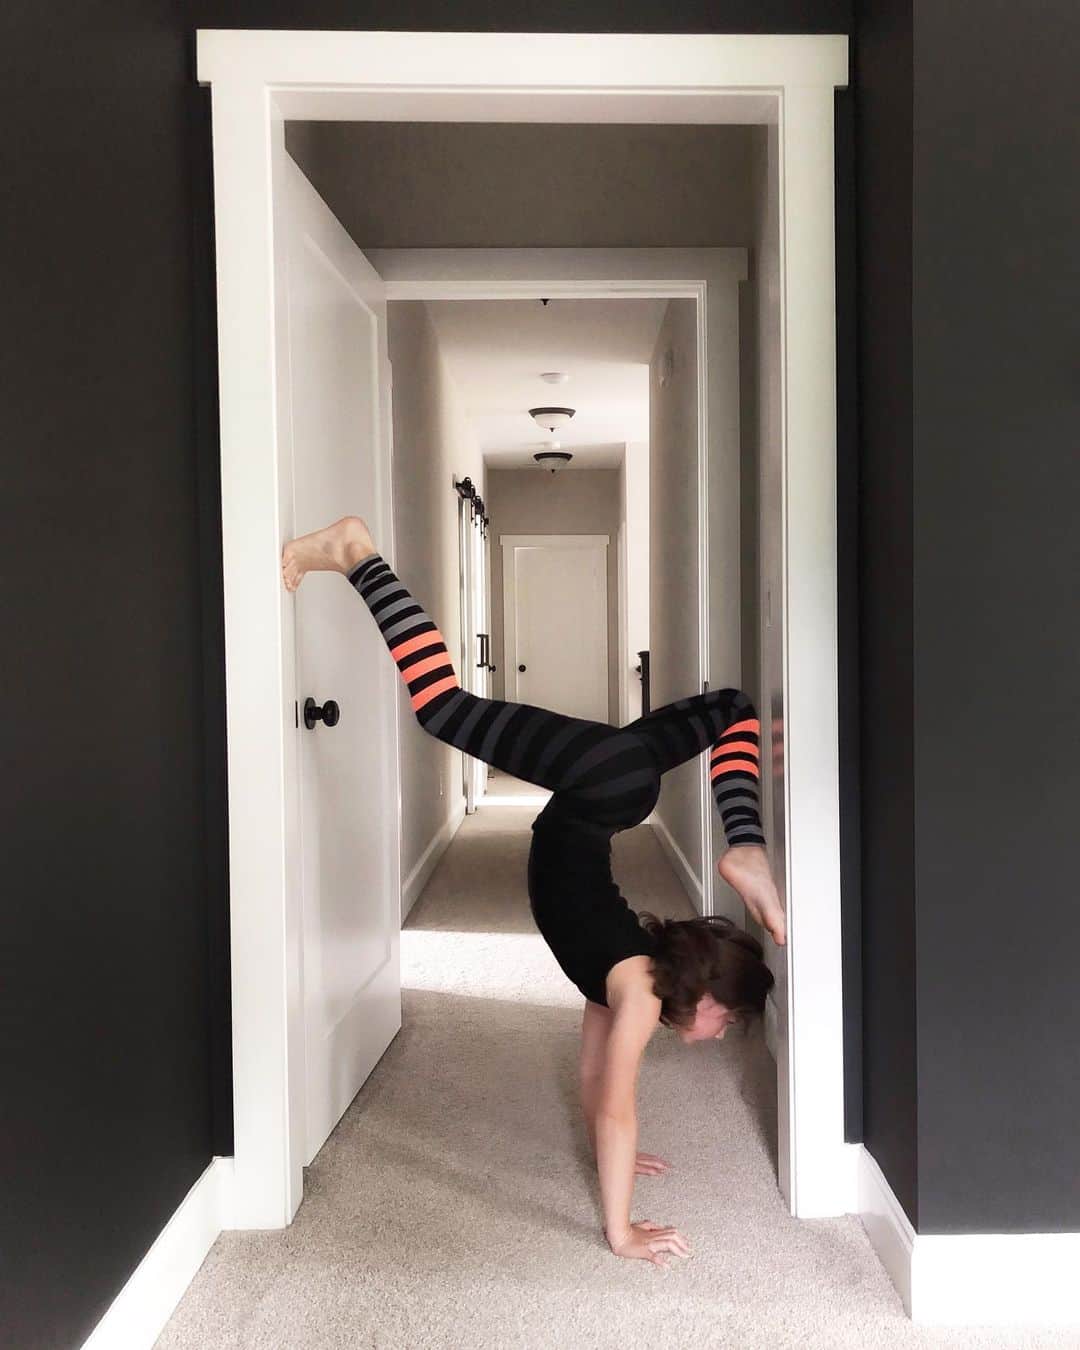 Angie Keiserのインスタグラム：「I thought Pinterest was malfunctioning because my feed was filled yoga poses, puppies, Star Wars, tattoos, and the Jonas Brothers. Turns out the kid has been using my account and created 26 secret boards for herself 😳 This pose is from her board named “contortion”. In other news, remember when I painted that one wall black in our master bedroom? Yeah well, I decided to paint the whole dang thing and we love it 🖤 Now it feels like the room is begging me to rip out the carpeting. You’re getting that vibe too, right? Because the more people on board with this plan, the easier it will be to convince Keith this is a good idea 😉」